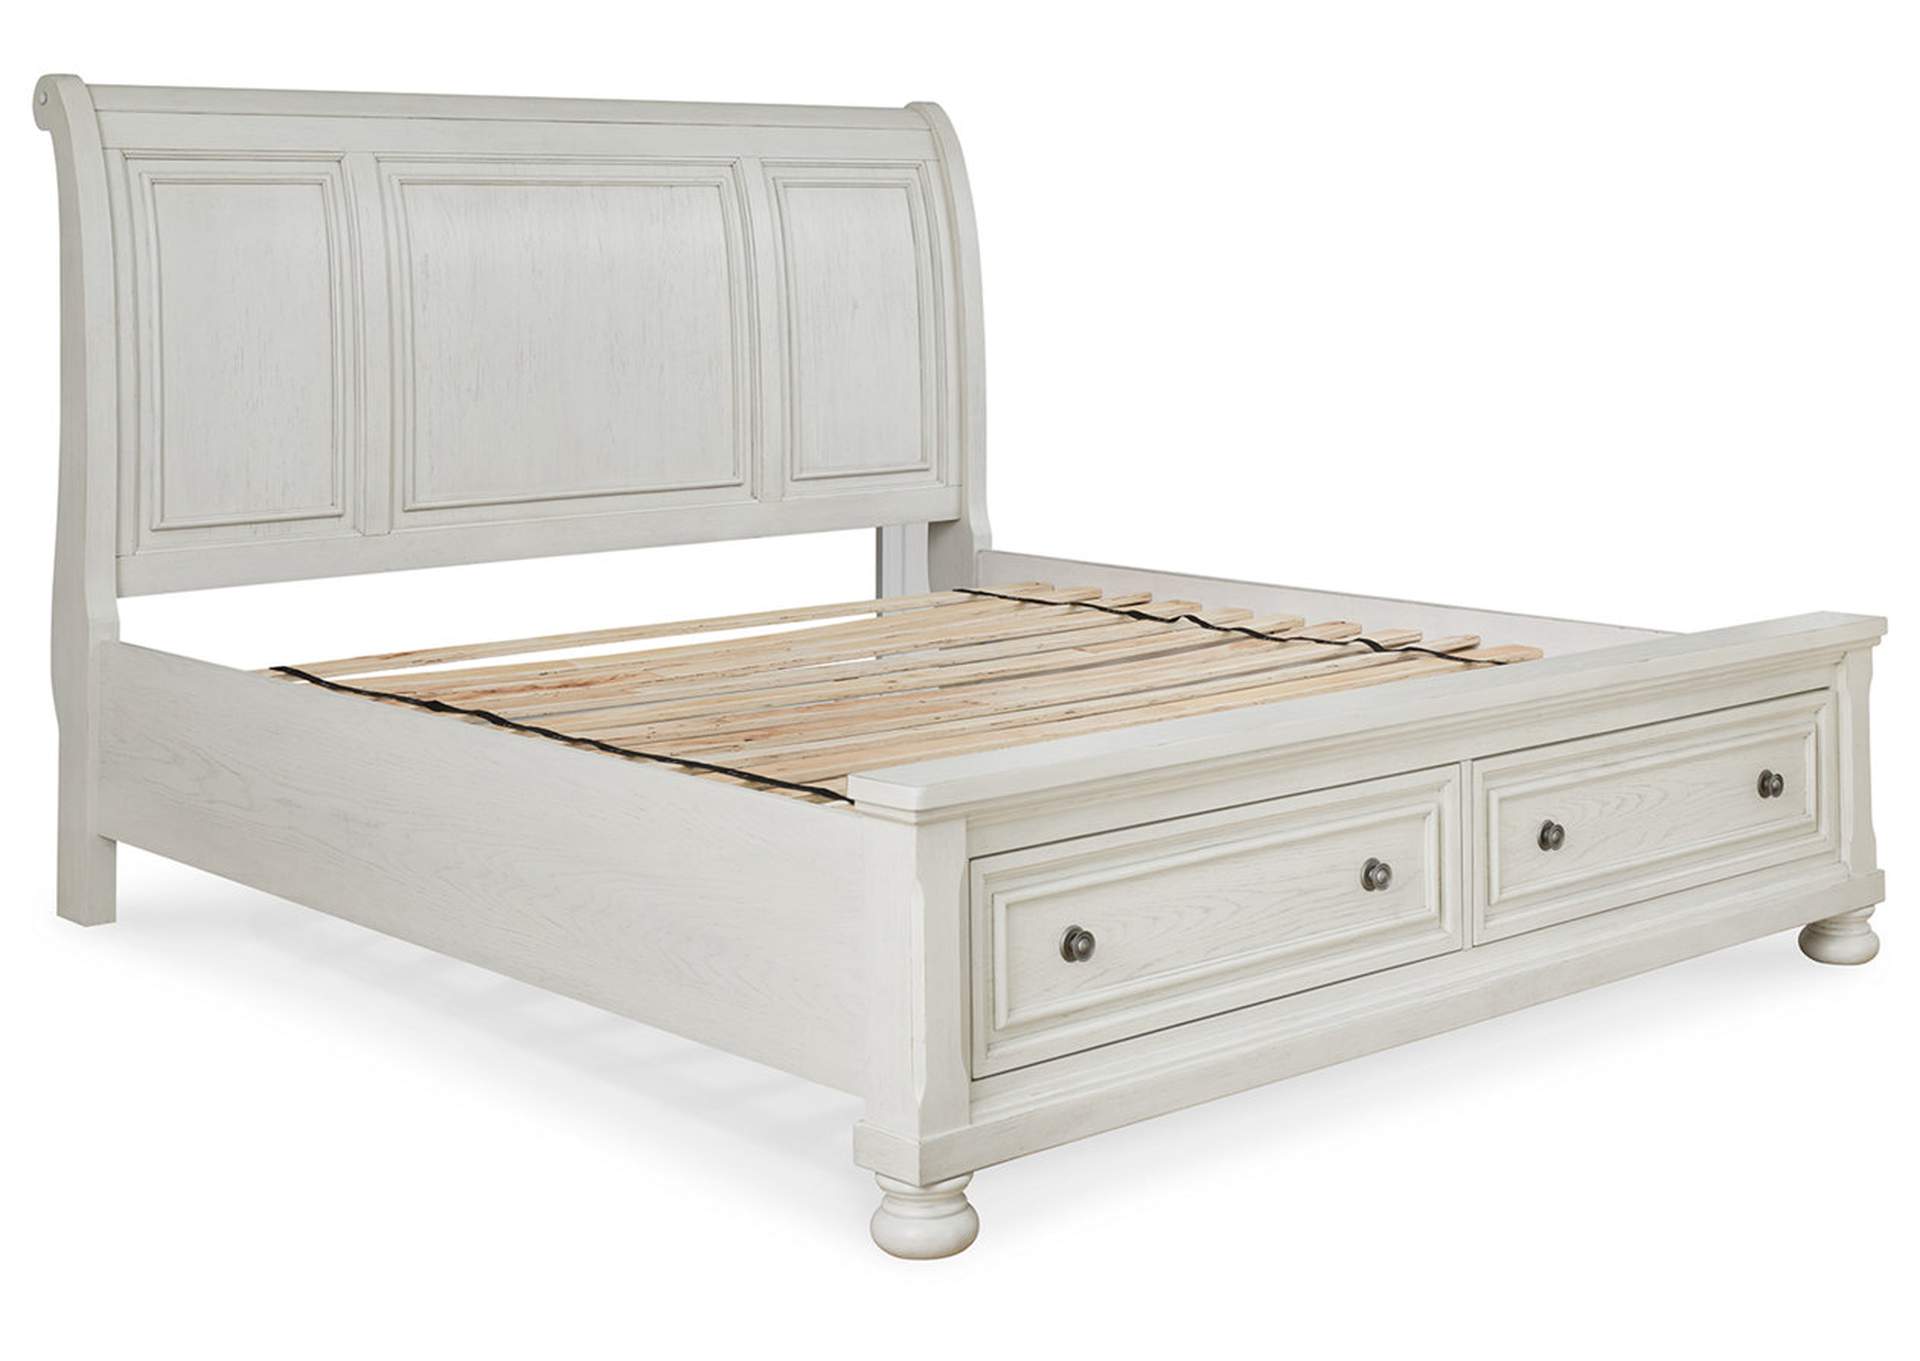 White Robbinsdale King Sleigh Bed With, White Wooden Sleigh Bed King